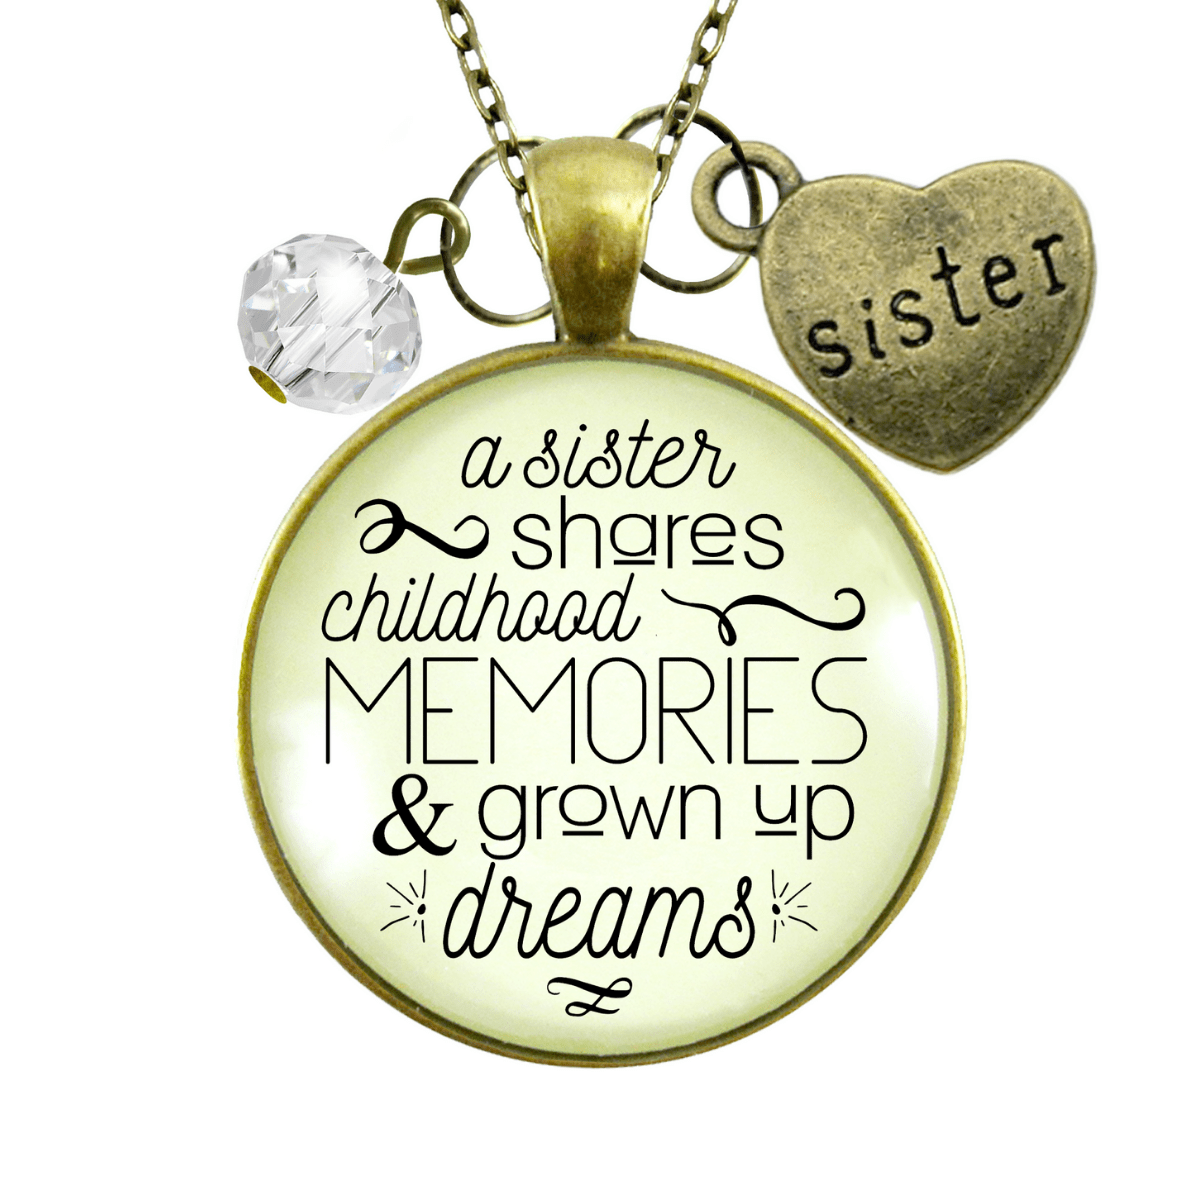 Gutsy Goodness Sisters Necklace Sister Shares Childhood Memories Meaningful Jewelry - Gutsy Goodness Handmade Jewelry;Sisters Necklace Sister Shares Childhood Memories Meaningful Jewelry - Gutsy Goodness Handmade Jewelry Gifts